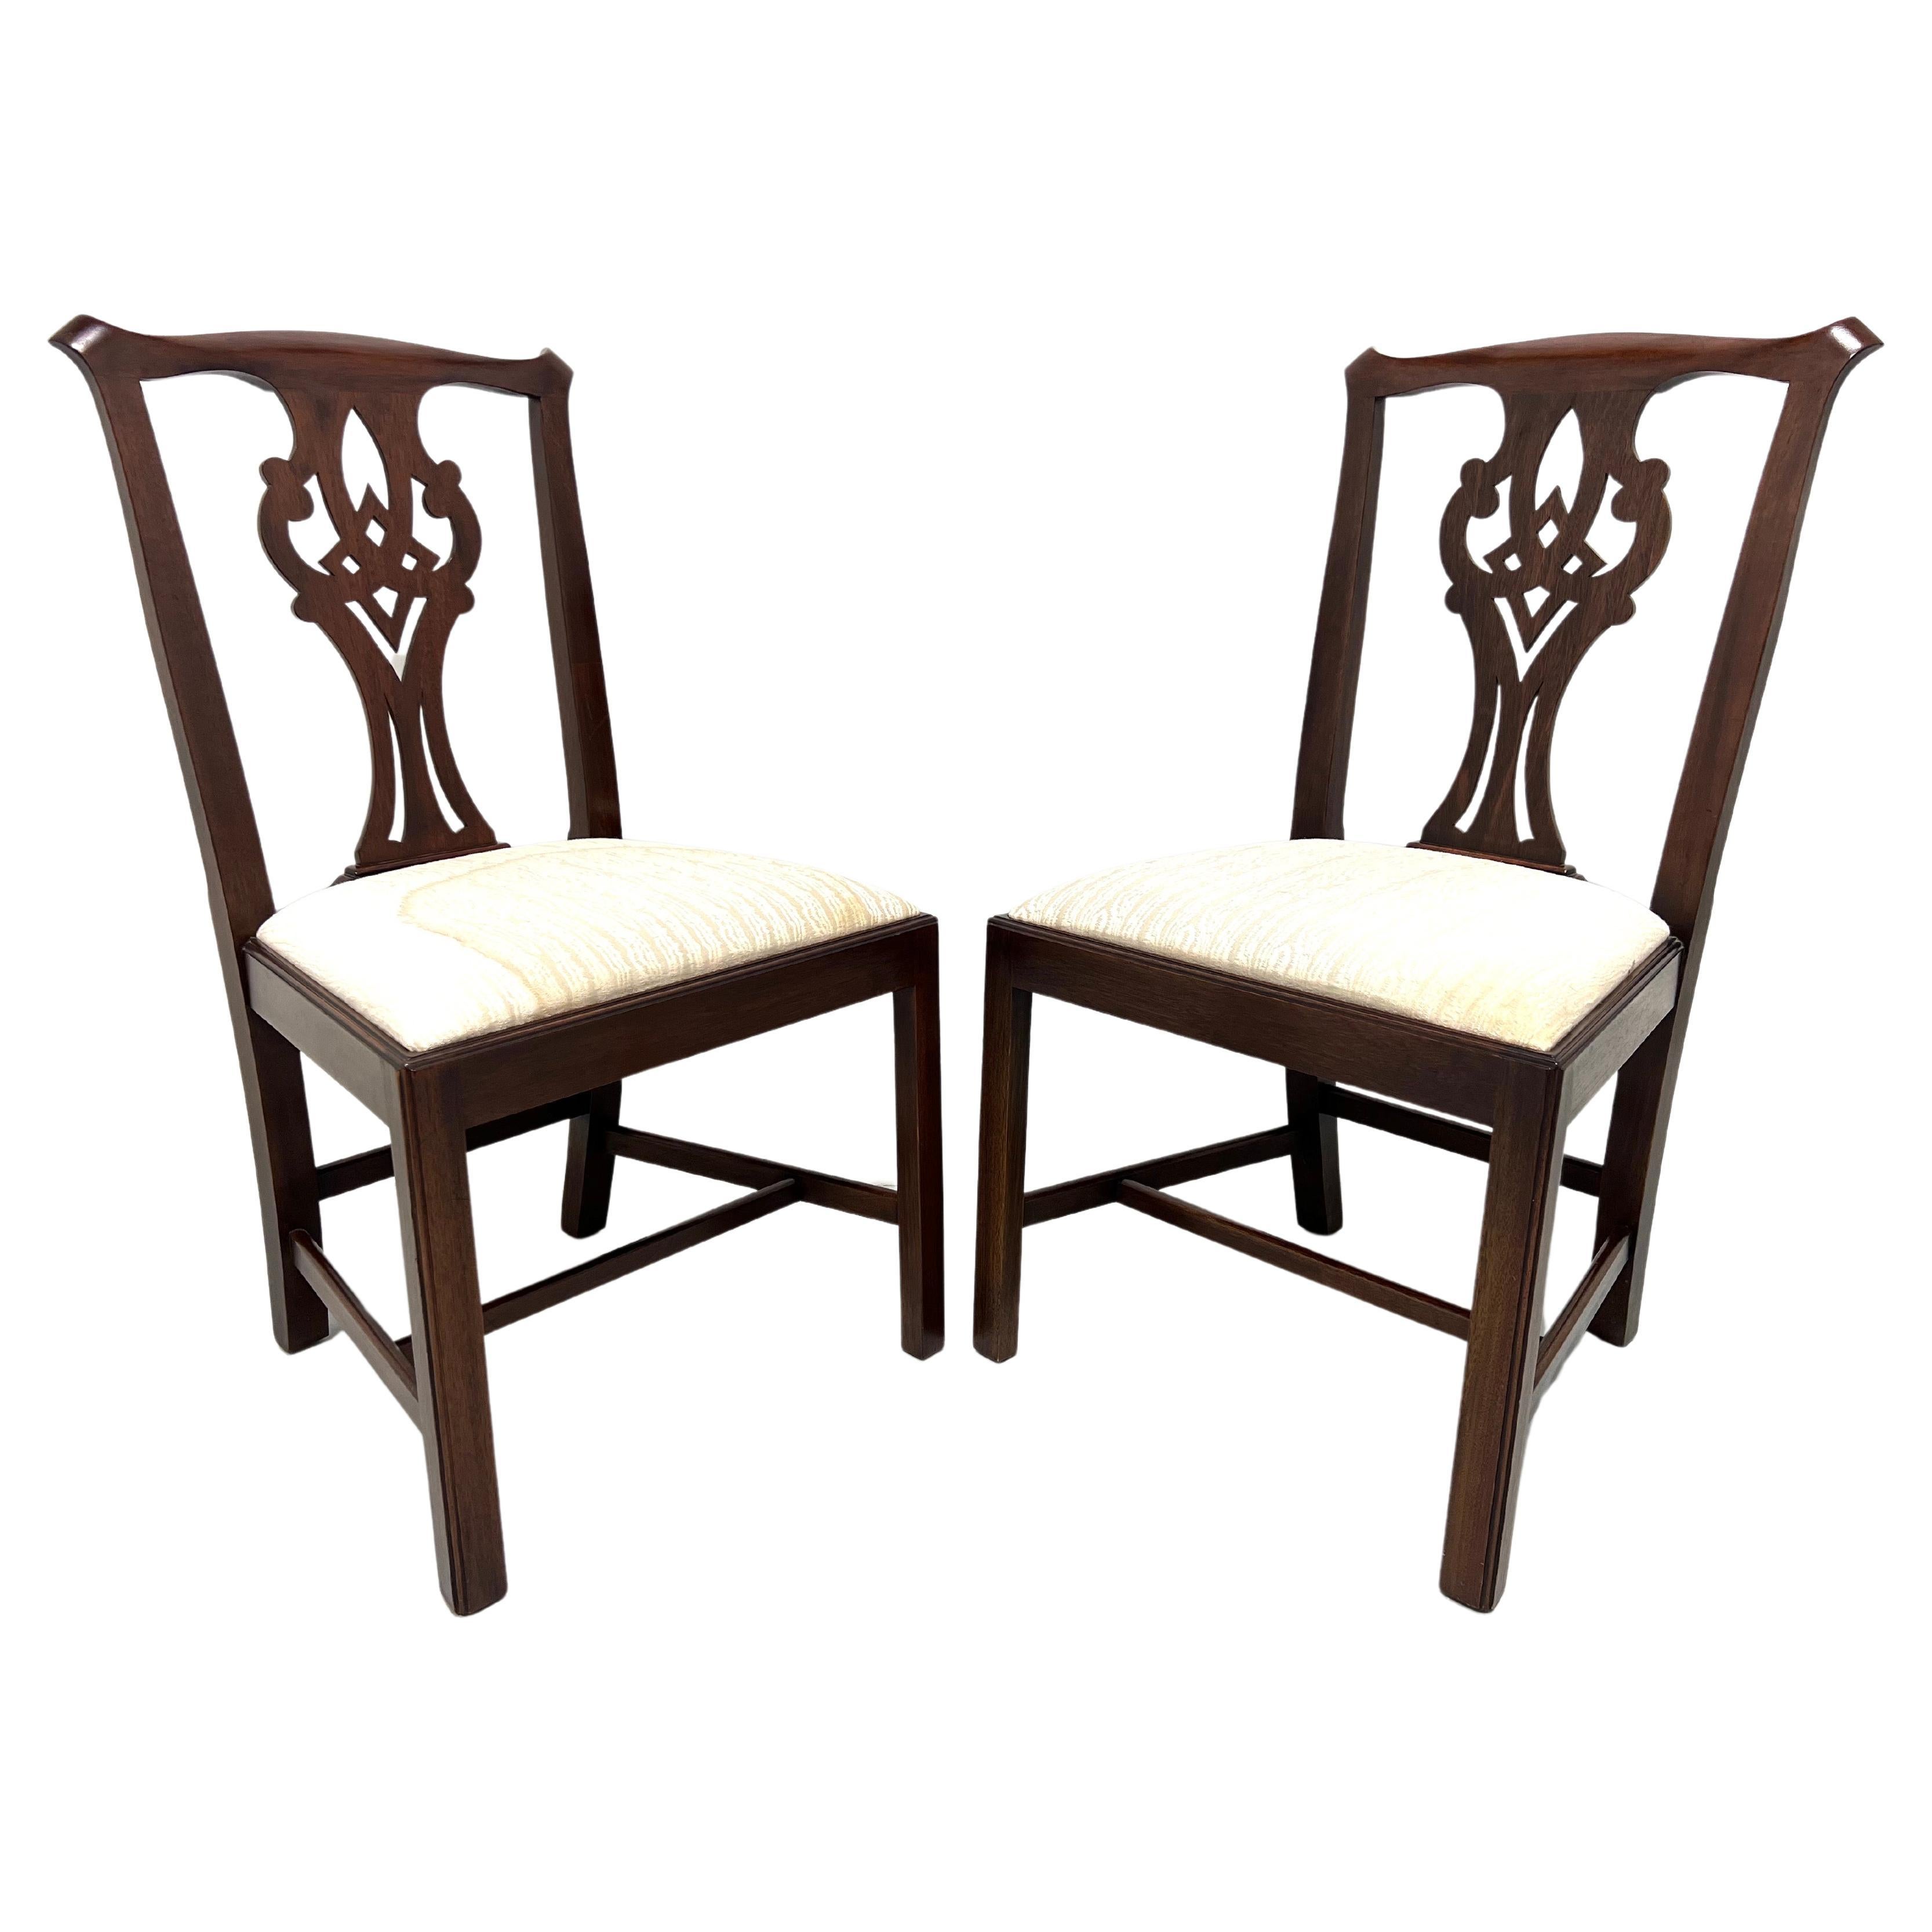 HENKEL HARRIS 101S 29 Mahogany Chippendale Dining Side Chairs - Pair A